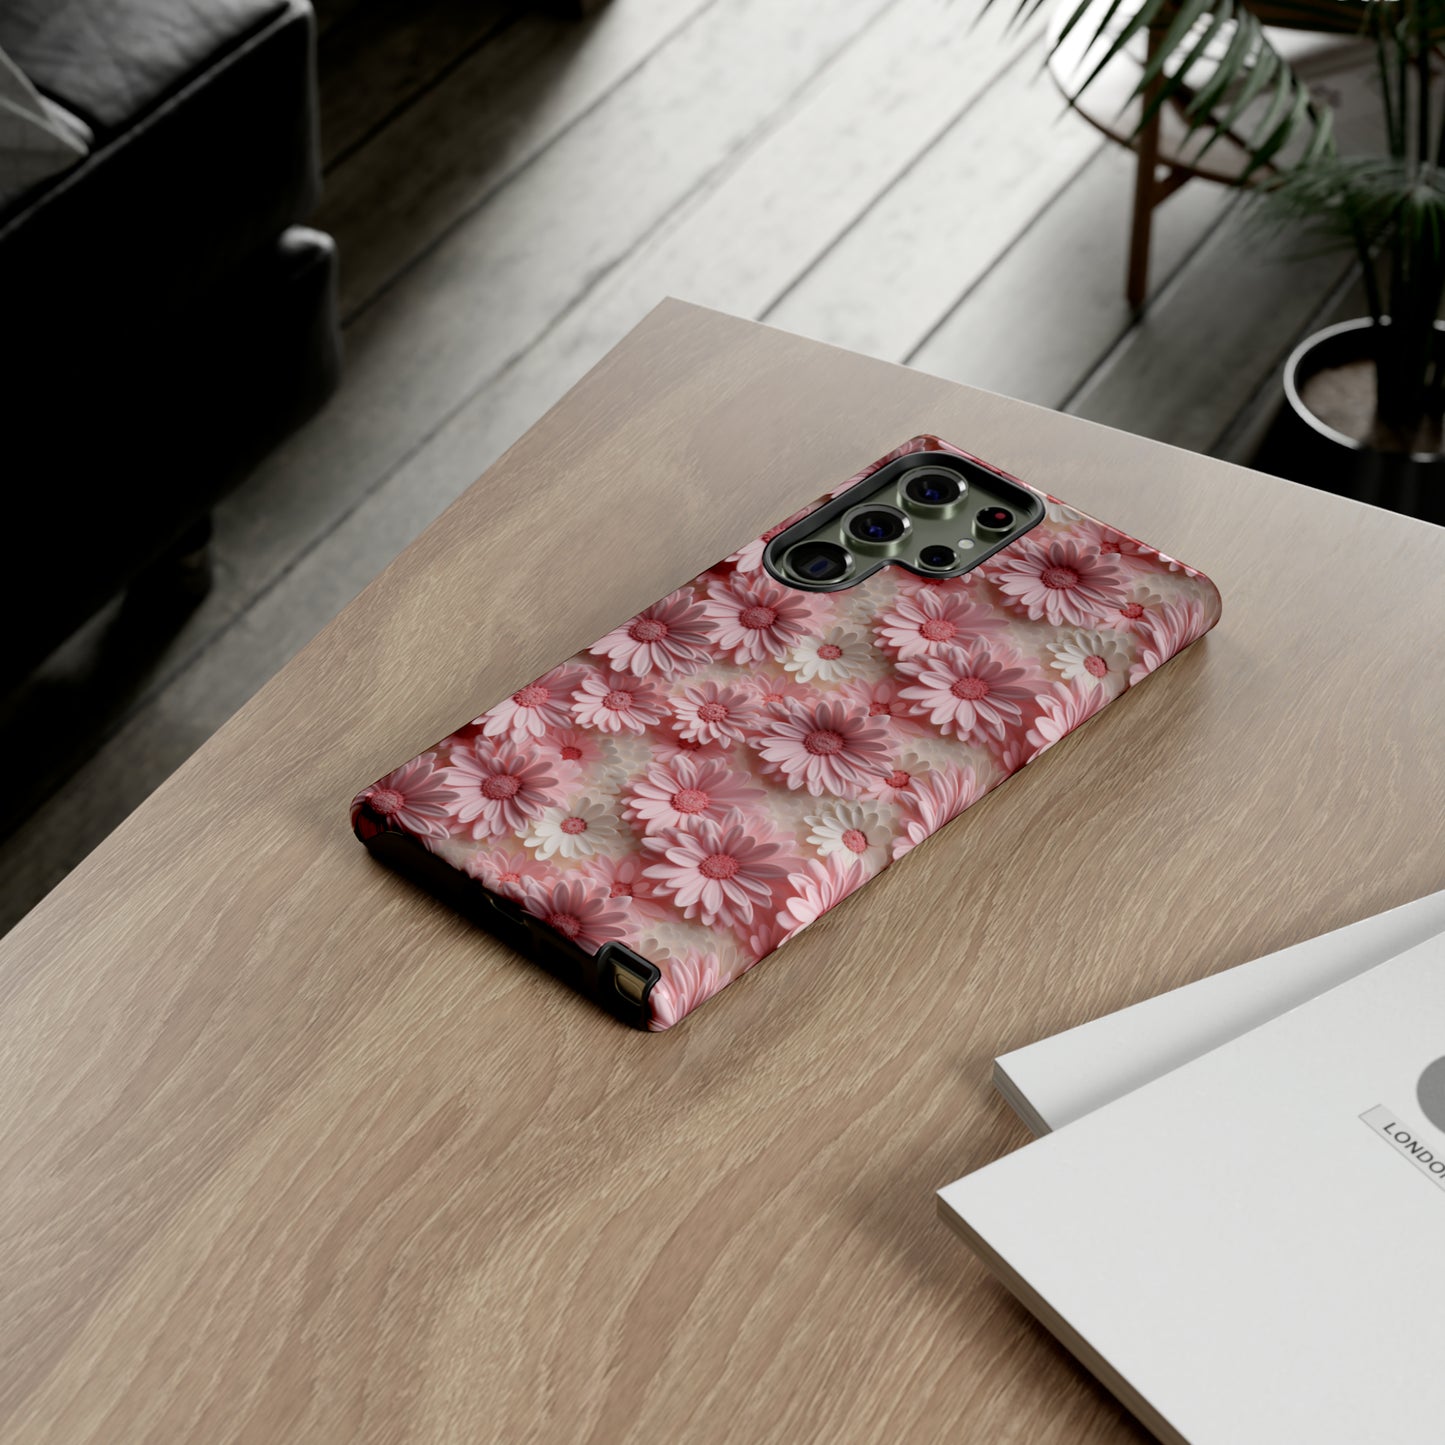 3D Pink and White Daisies print design Tough Phone Case compatible with a large variety of Samsung models